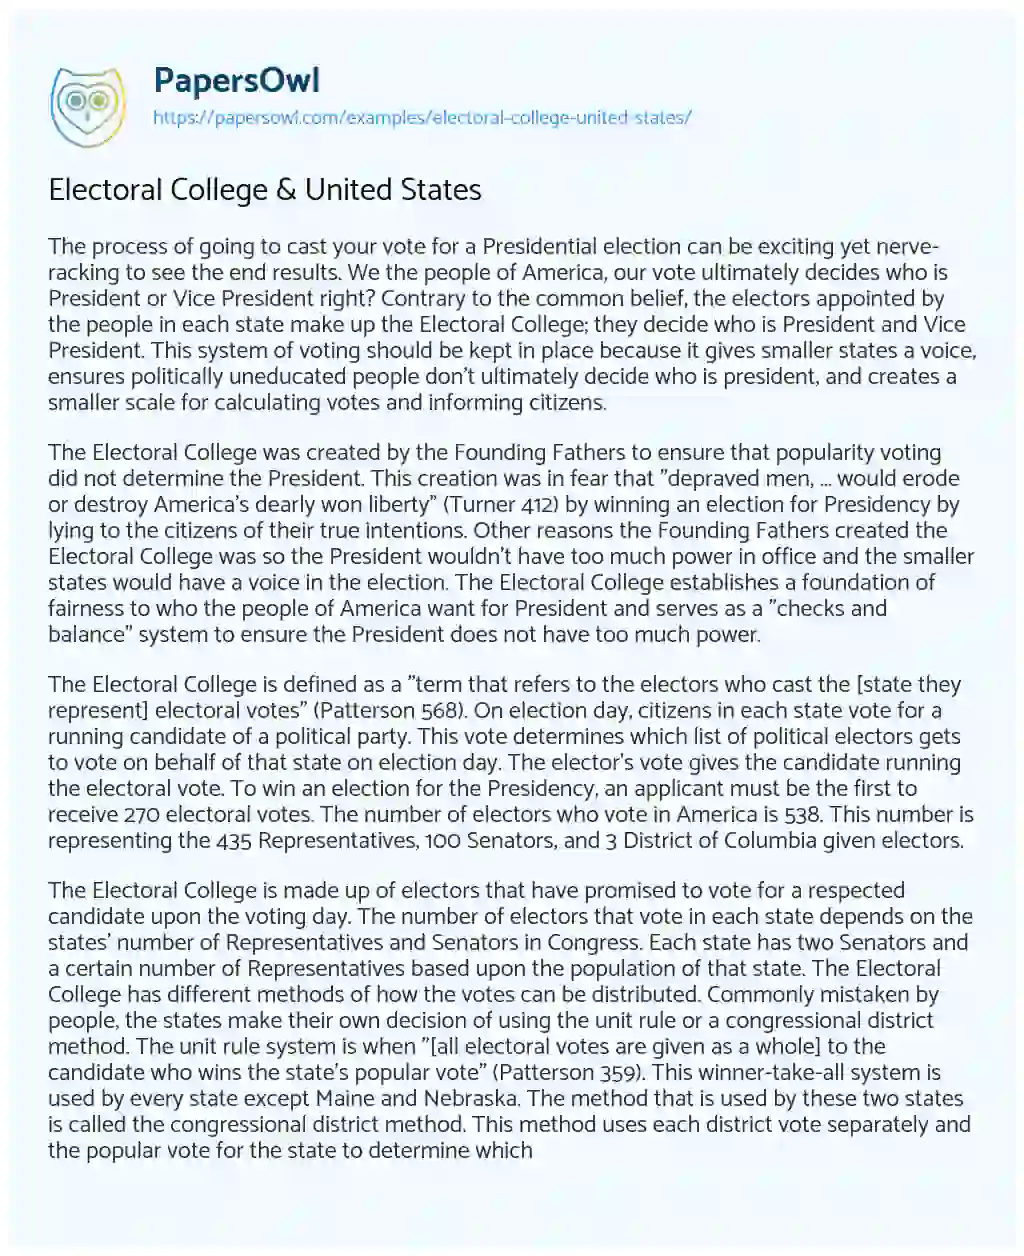 Essay on Electoral College & United States